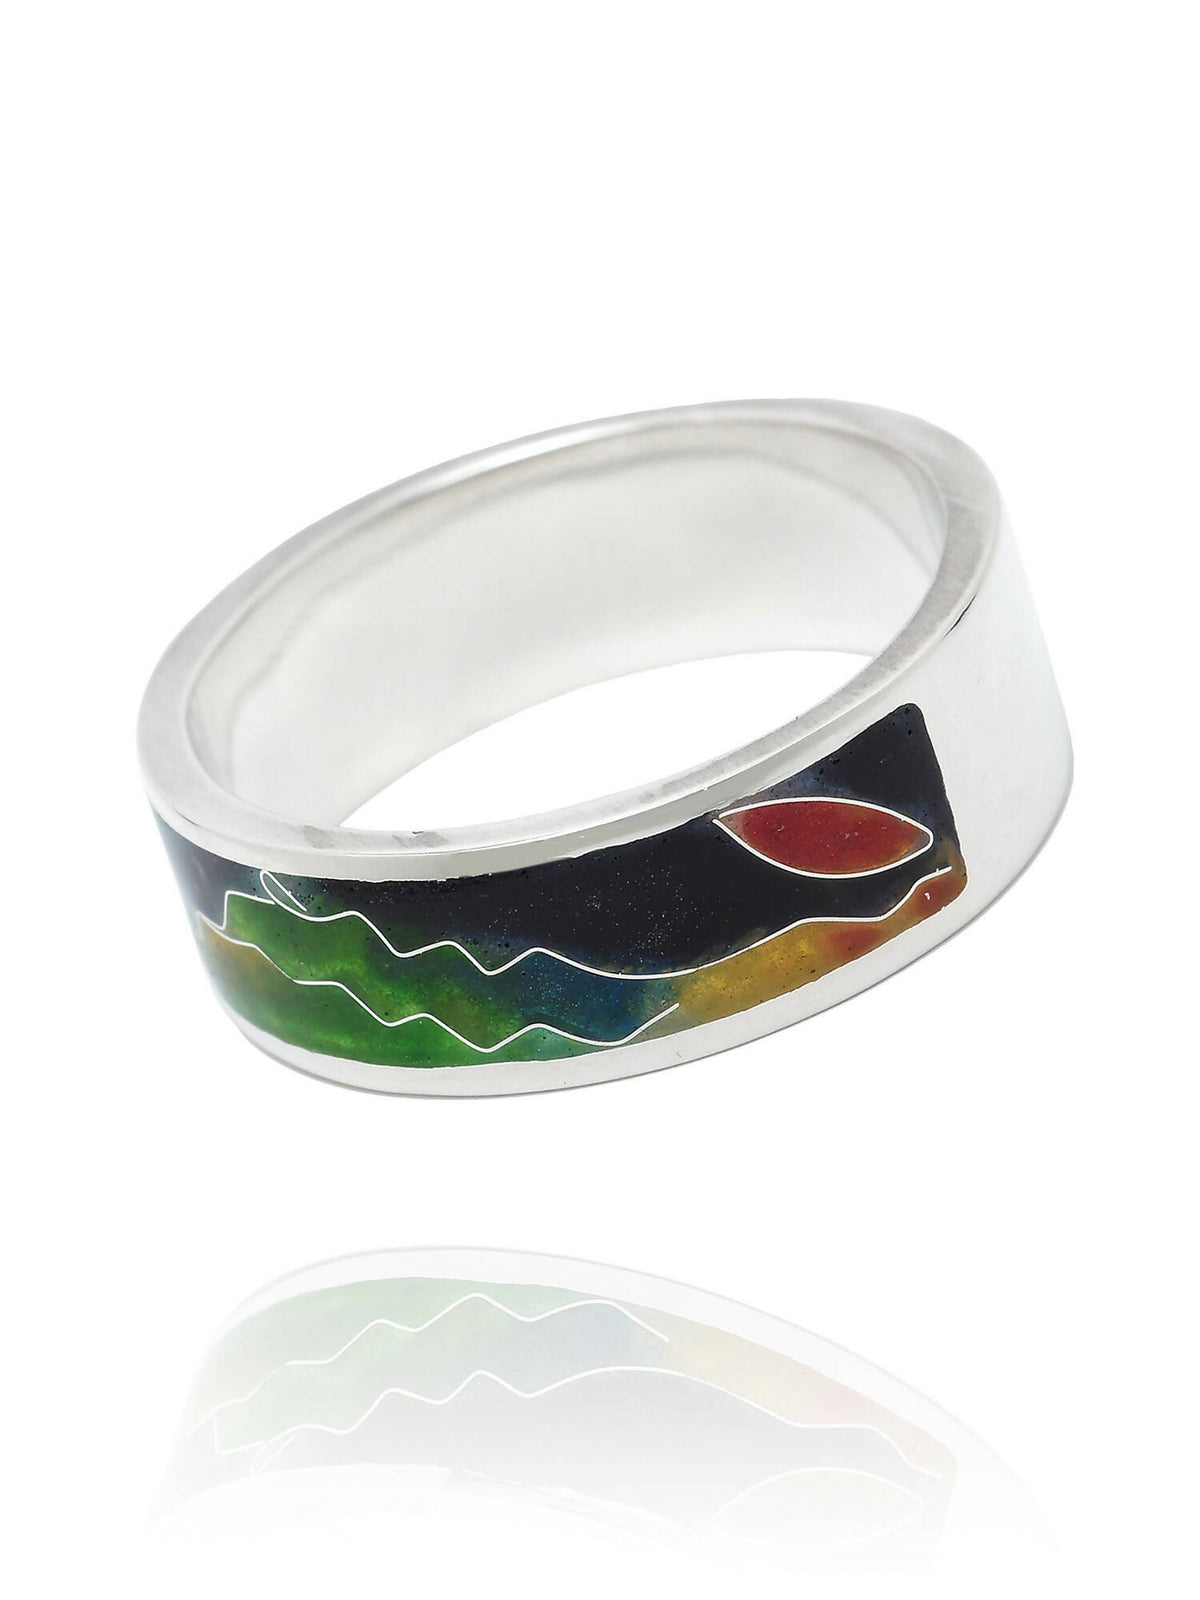 Green forest band ring